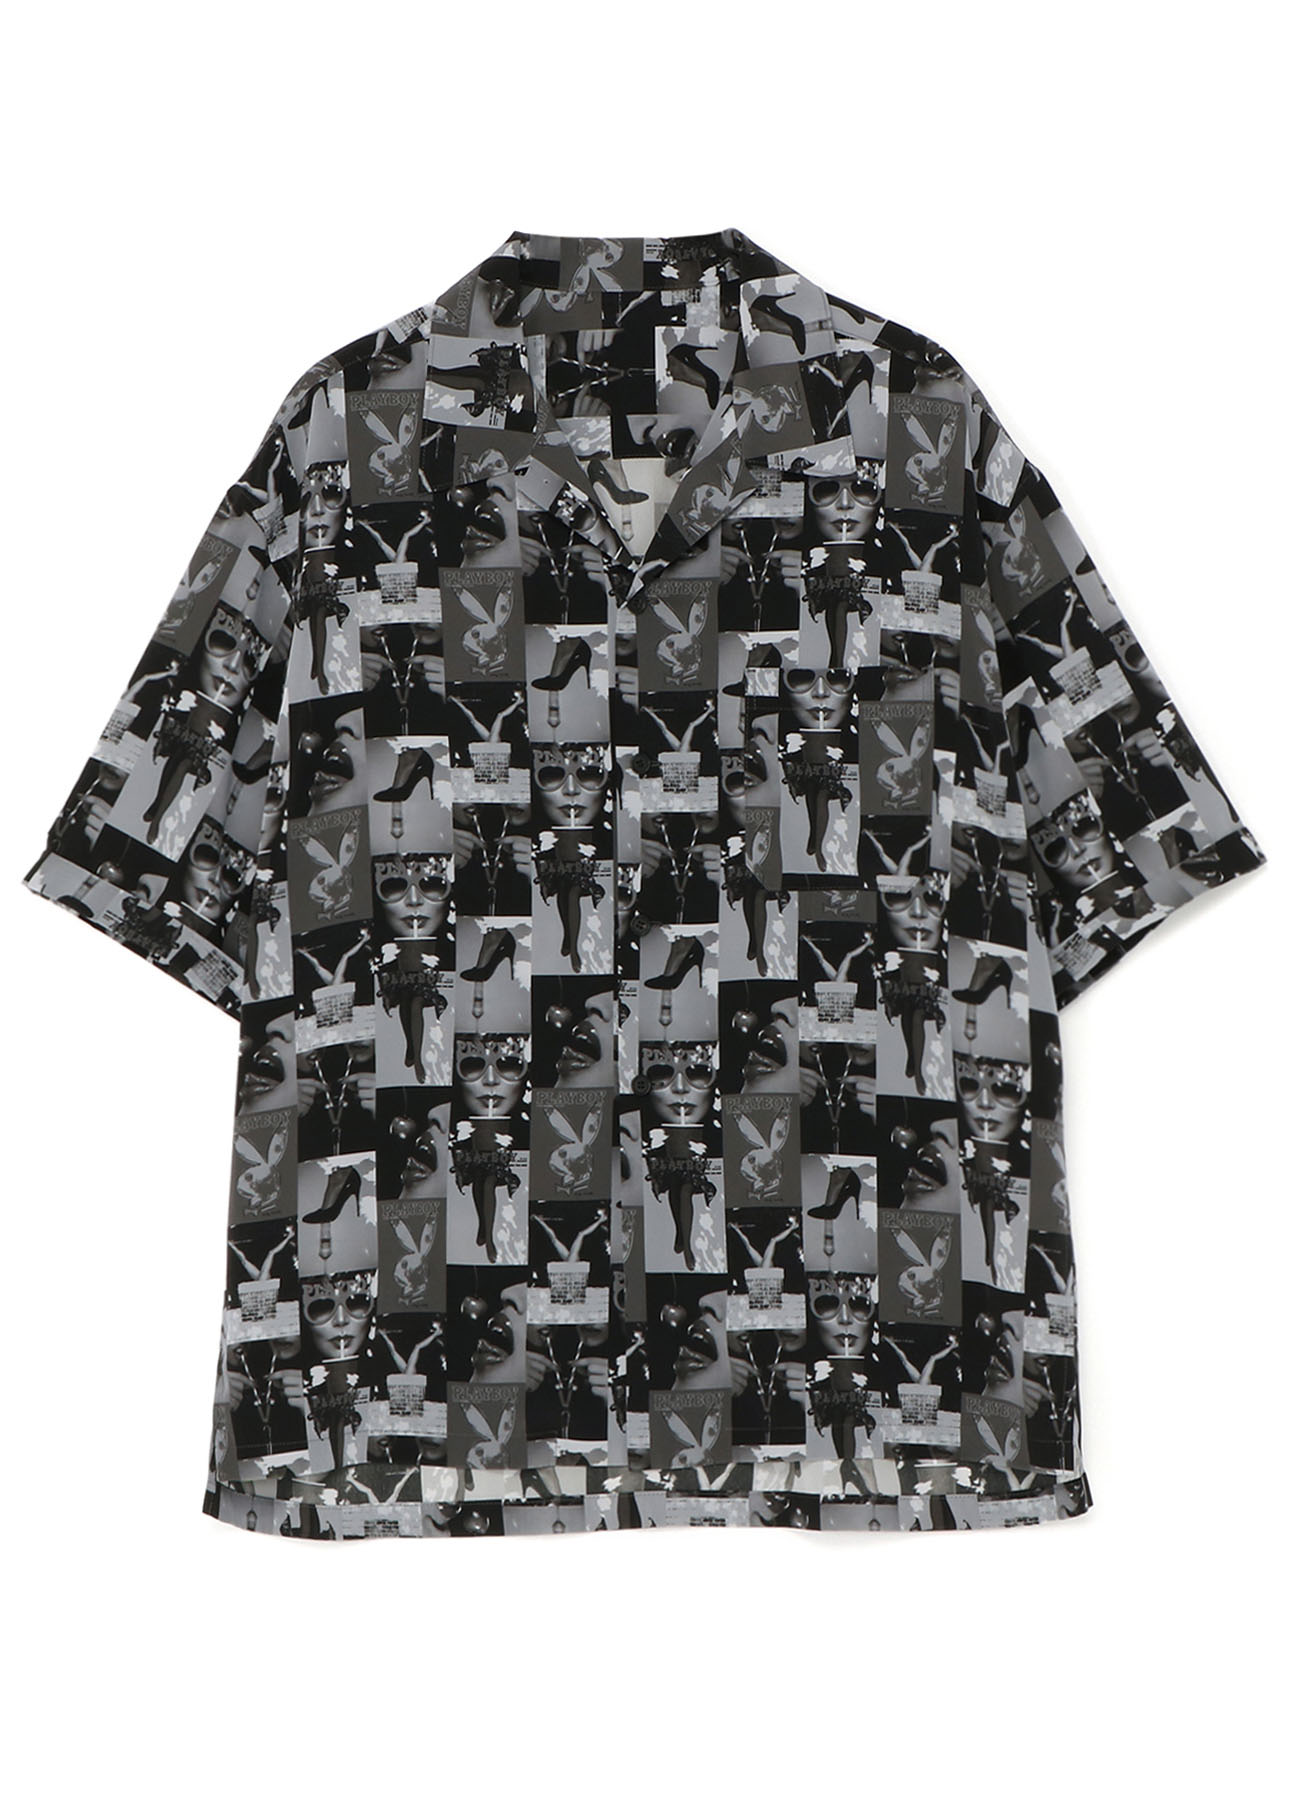 PLAYBOY×S’YTE COVER BEST COLLAGE BIG SHORT SLEEVE SHIRT